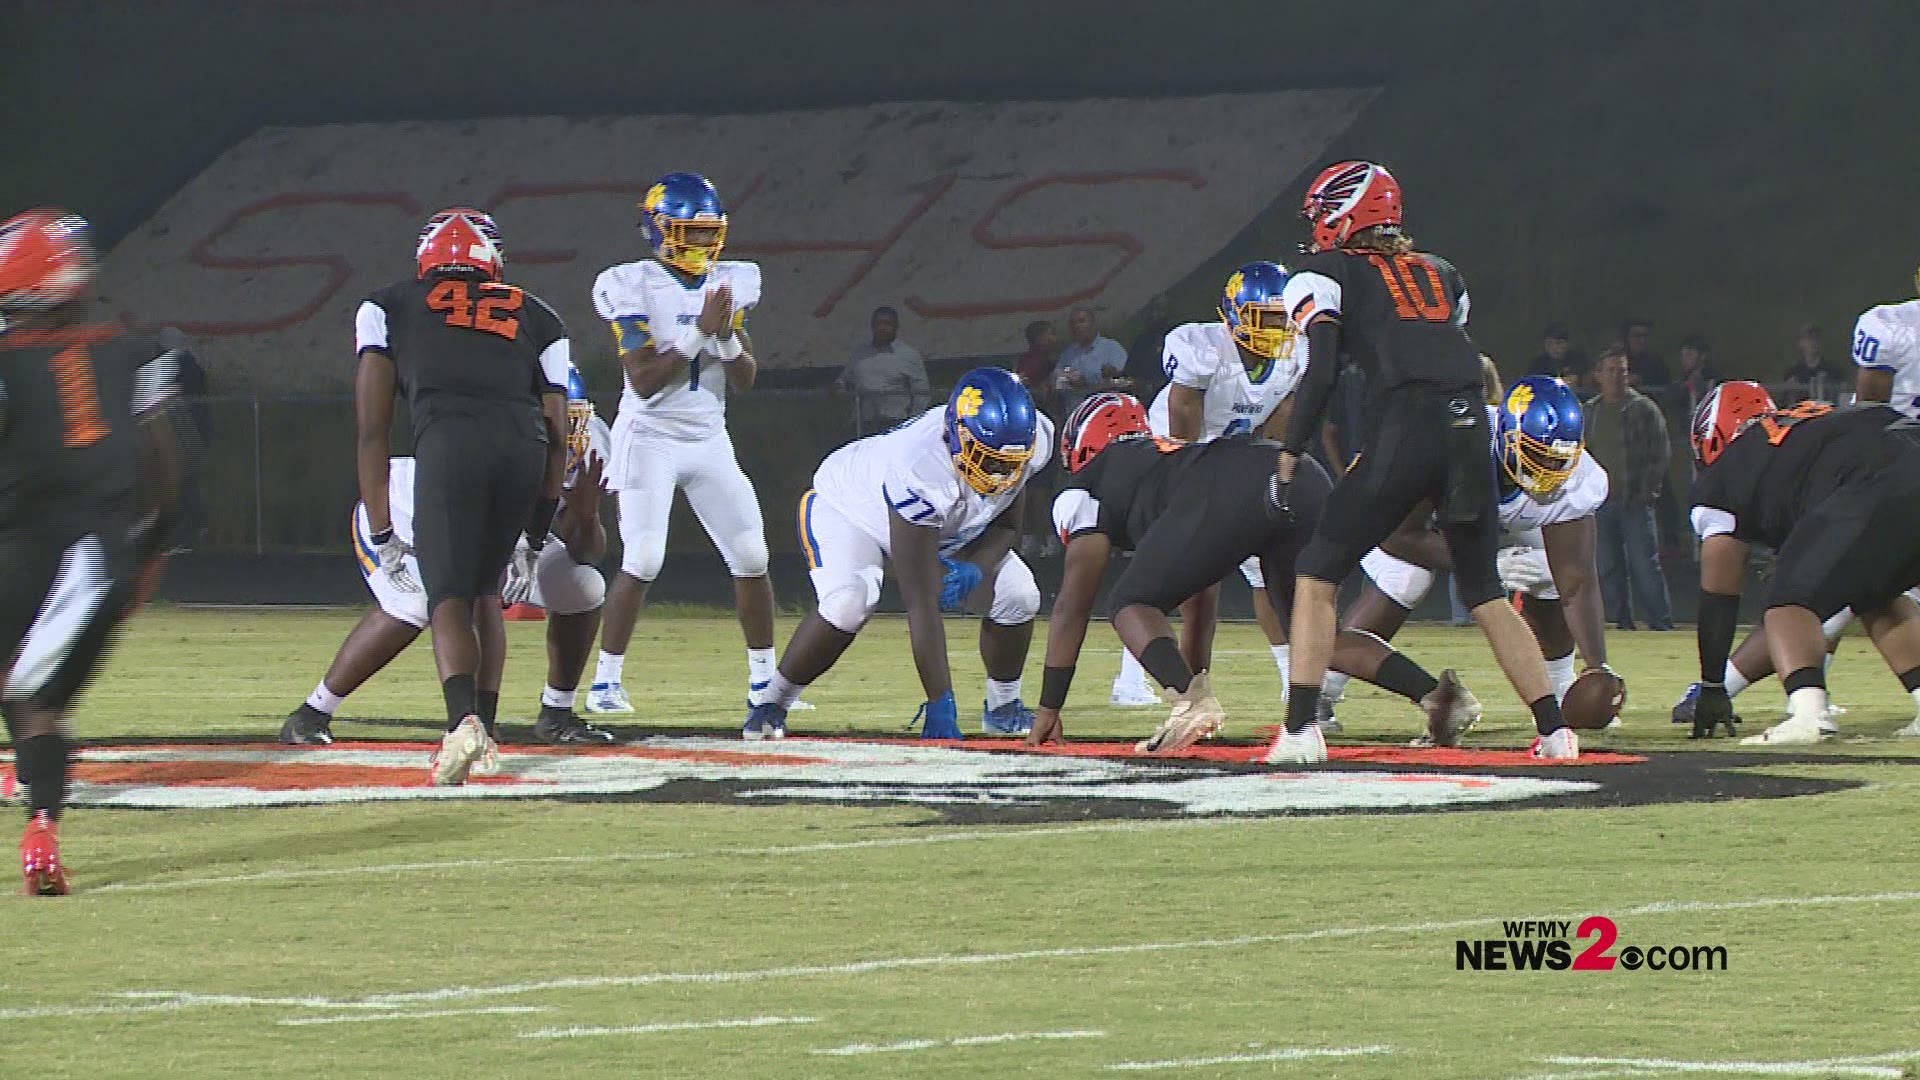 A quick look back at the week 4 highlights between the Dudley Panthers and Southeast Guilford.